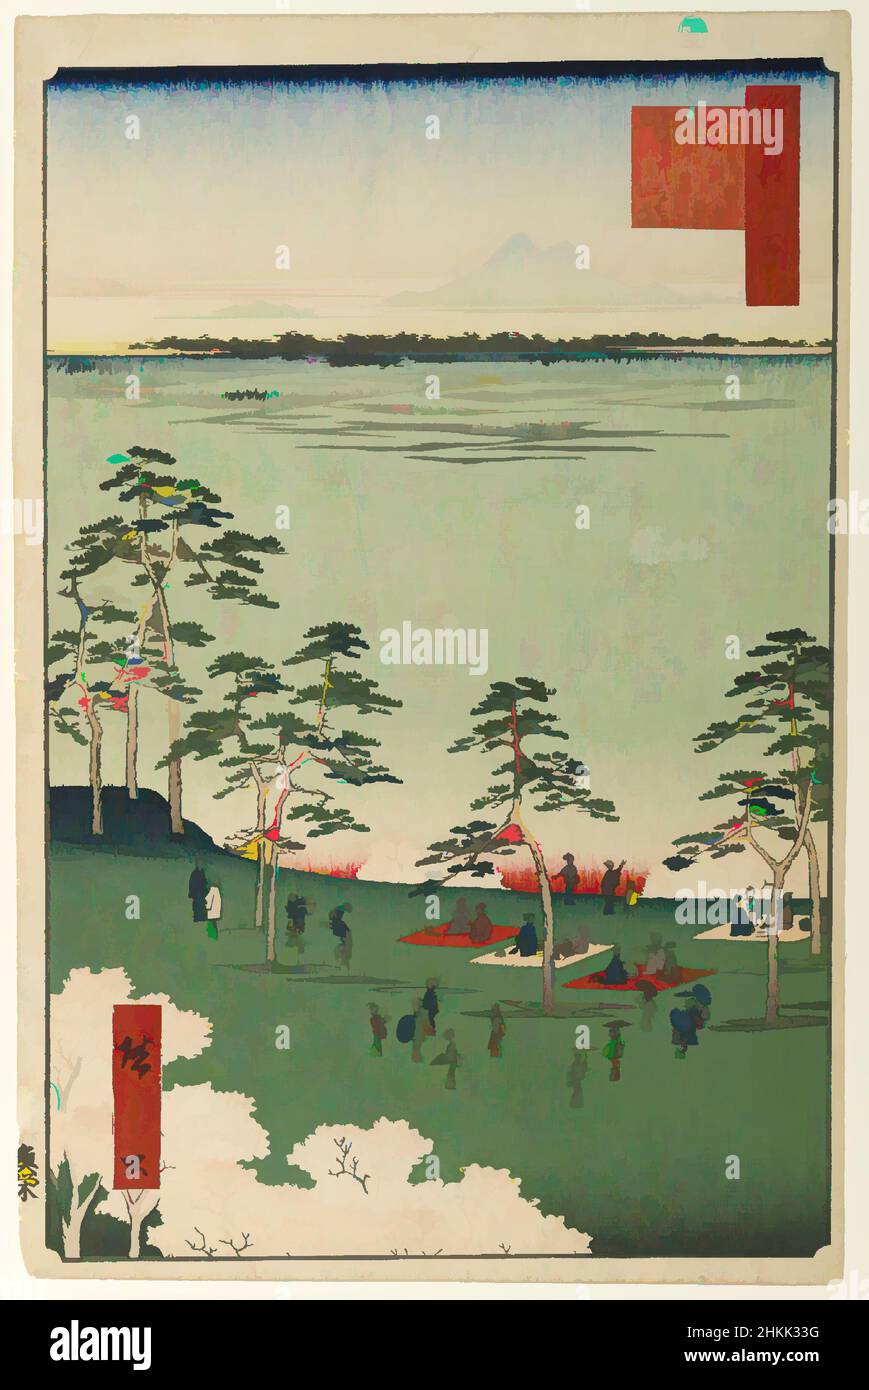 Art inspired by View to the North From Asukayama, No. 17 in One Hundred Famous Views of Edo, Utagawa Hiroshige, Ando, Japanese, 1797-1858, Woodblock print, Japan, 5th month of 1856, Edo Period, Ansei Era, Image: 13 3/8 x 8 3/4 in., 34 x 22.2 cm, 19th Century, 19thC, cherry blossom, Edo, Classic works modernized by Artotop with a splash of modernity. Shapes, color and value, eye-catching visual impact on art. Emotions through freedom of artworks in a contemporary way. A timeless message pursuing a wildly creative new direction. Artists turning to the digital medium and creating the Artotop NFT Stock Photo